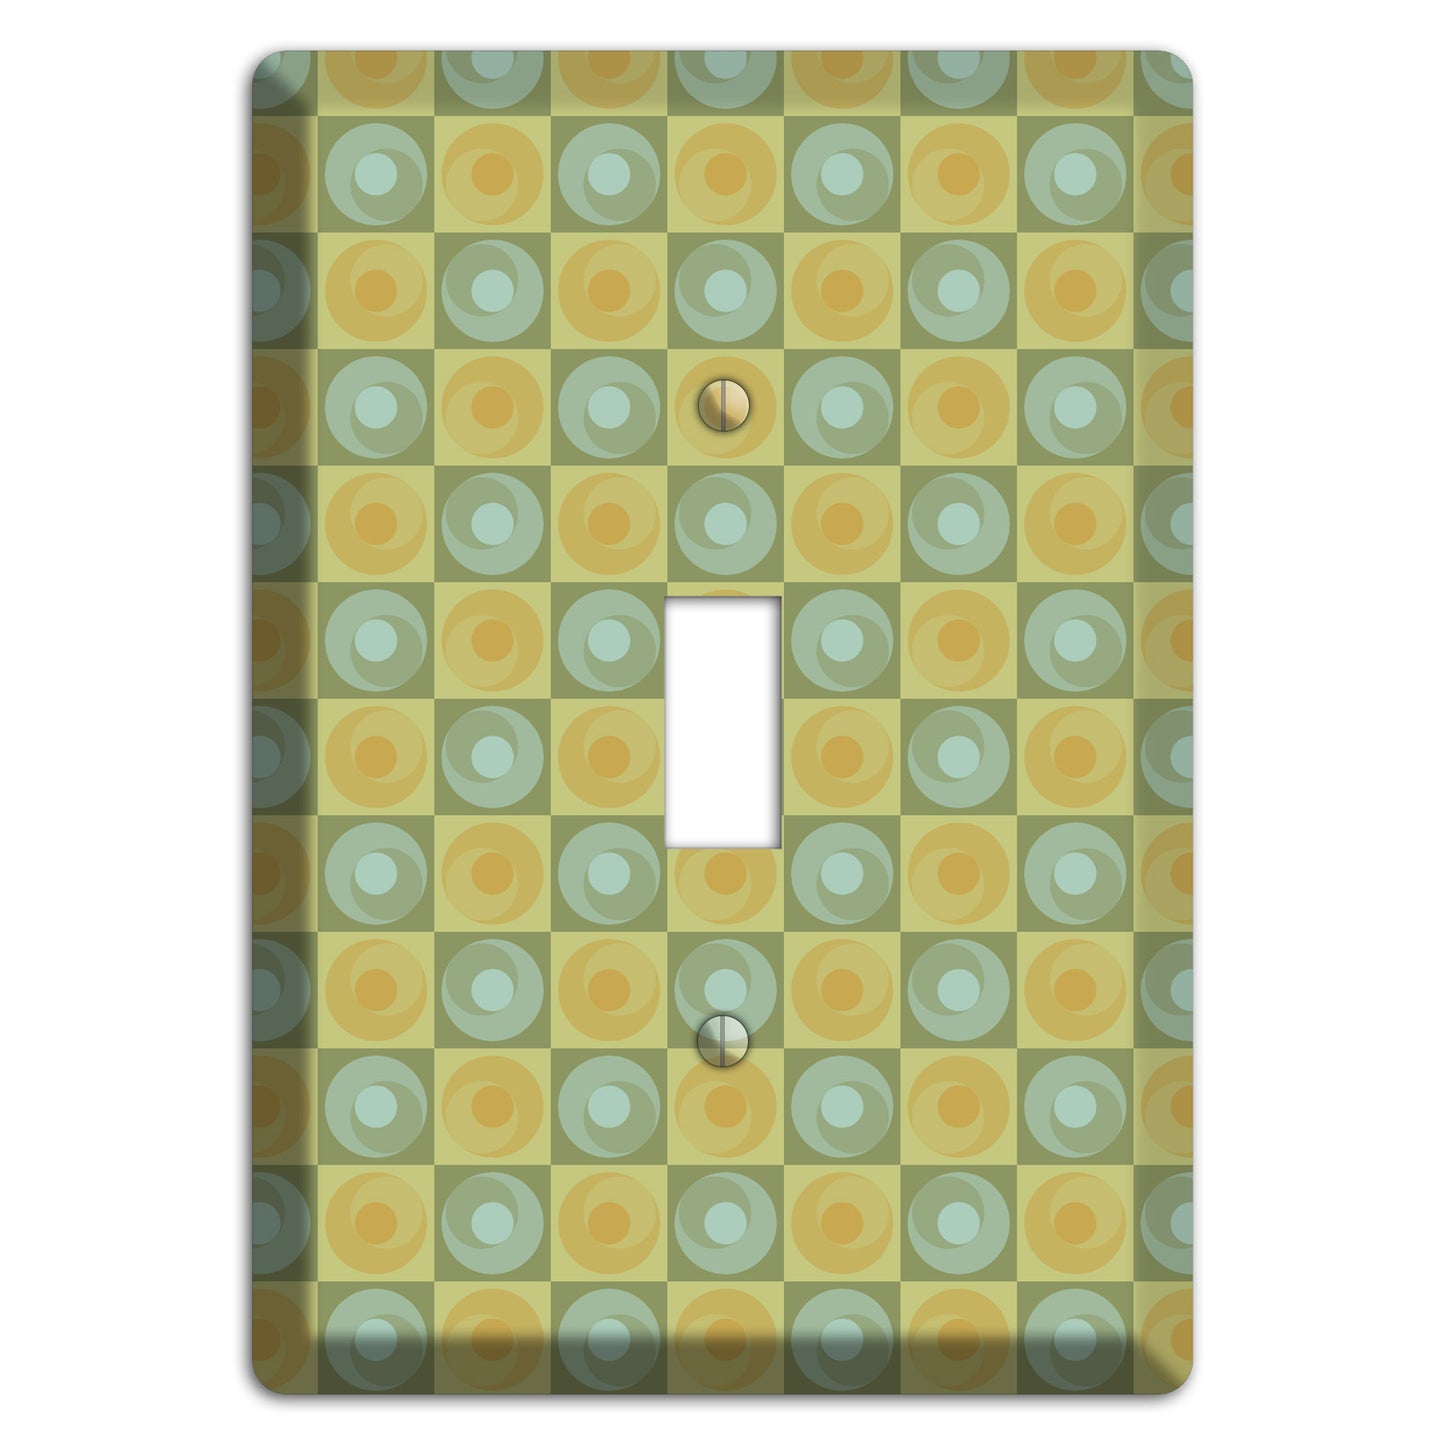 Green and Yellow Squares Cover Plates